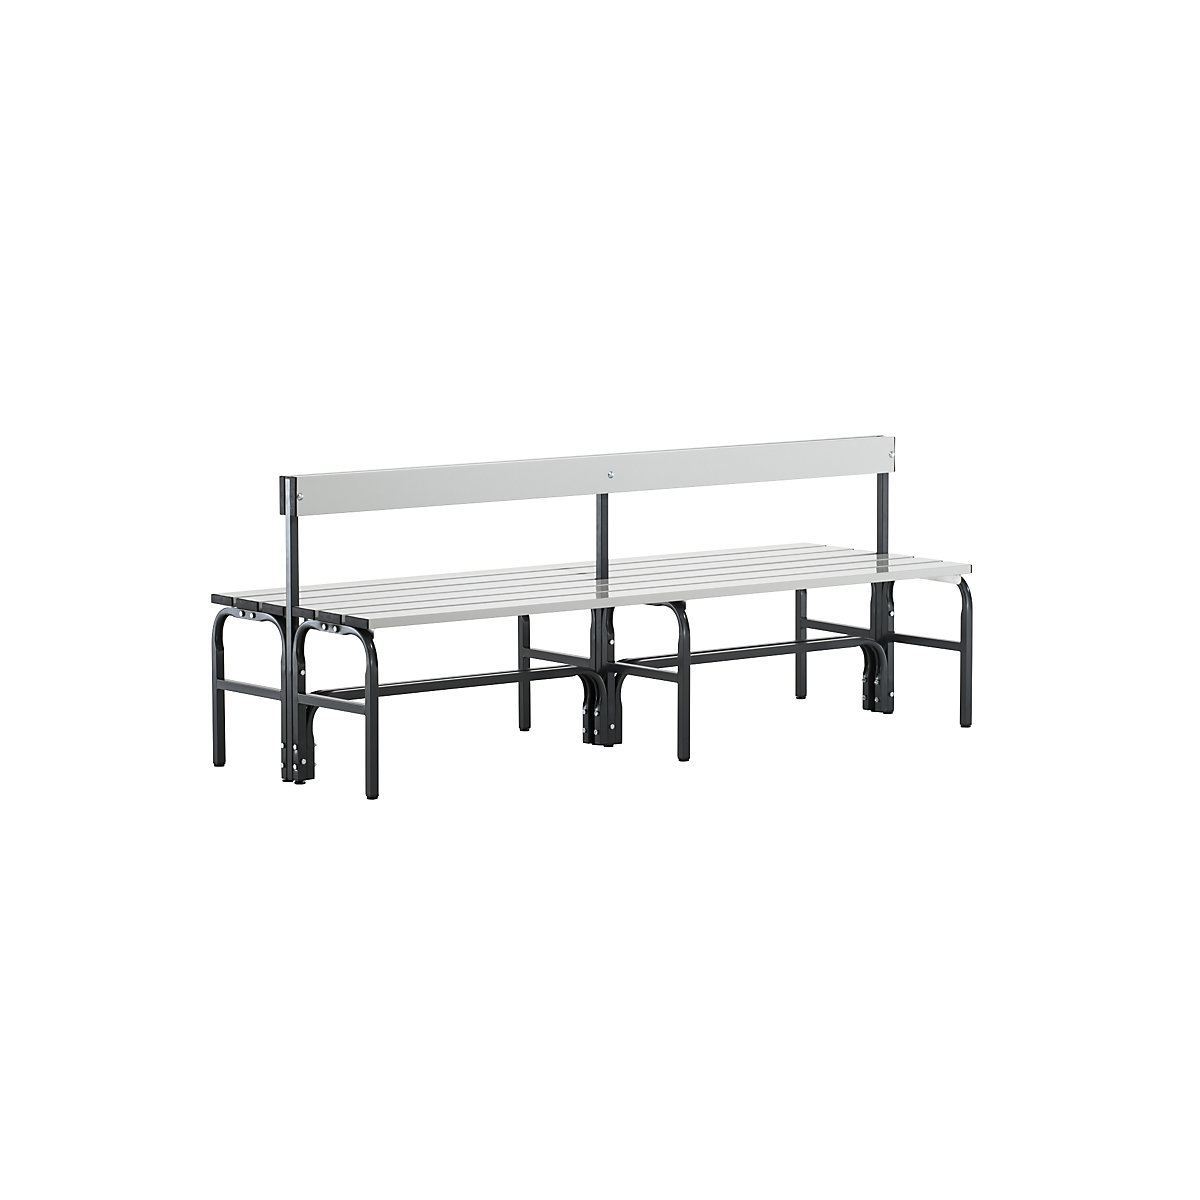 Half height cloakroom bench with back rest, double sided – Sypro, aluminium, length 1500 mm, charcoal